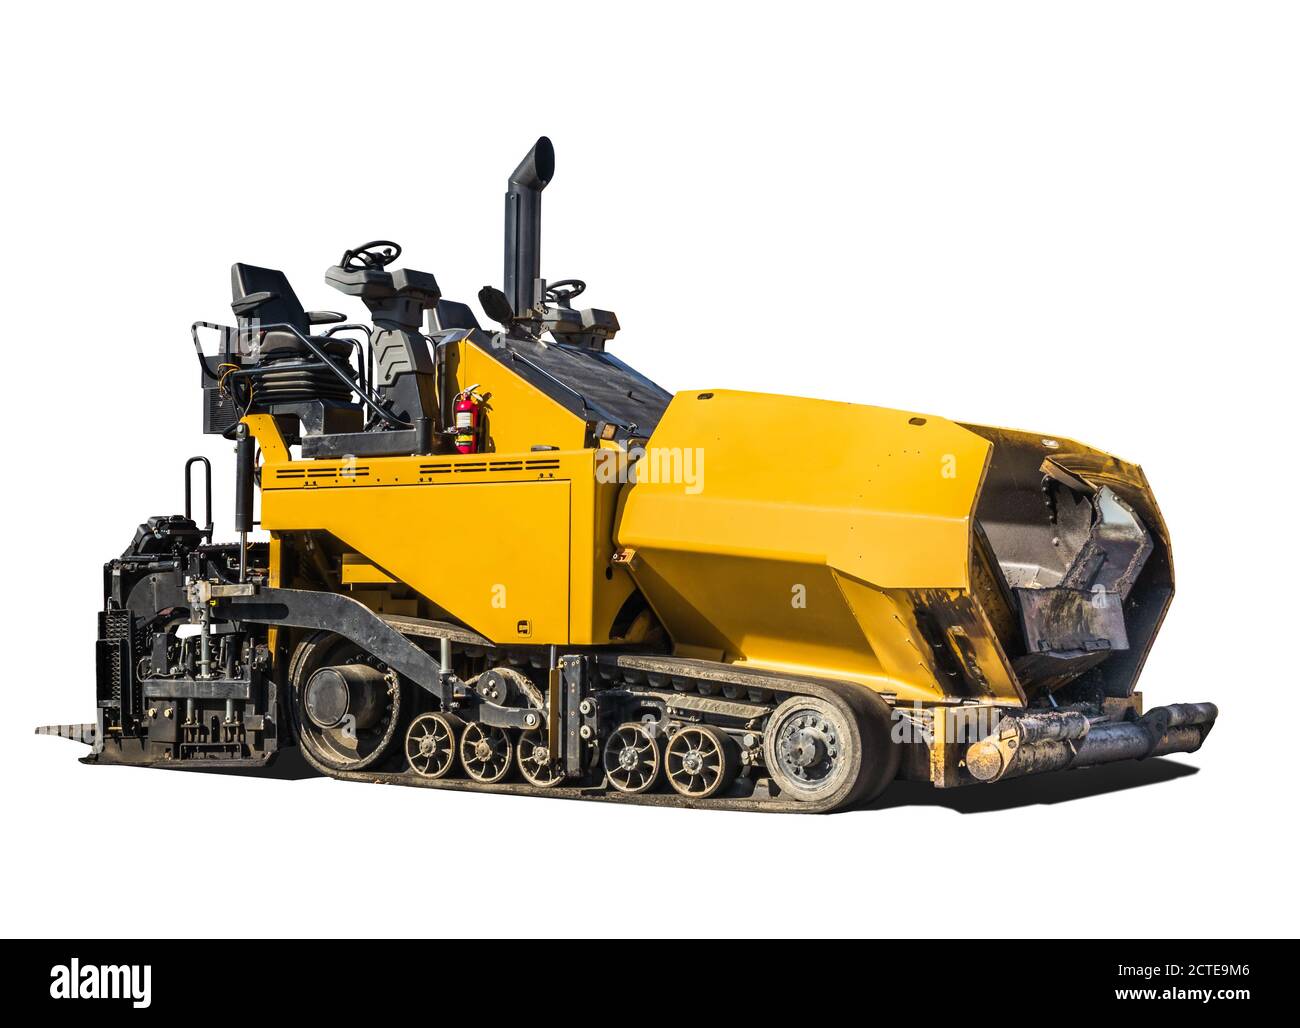 Large asphalt paving machine. Yellow road construction vehicle, with exposed drivers seat. Rubber truck paver. Isolated on white. Stock Photo